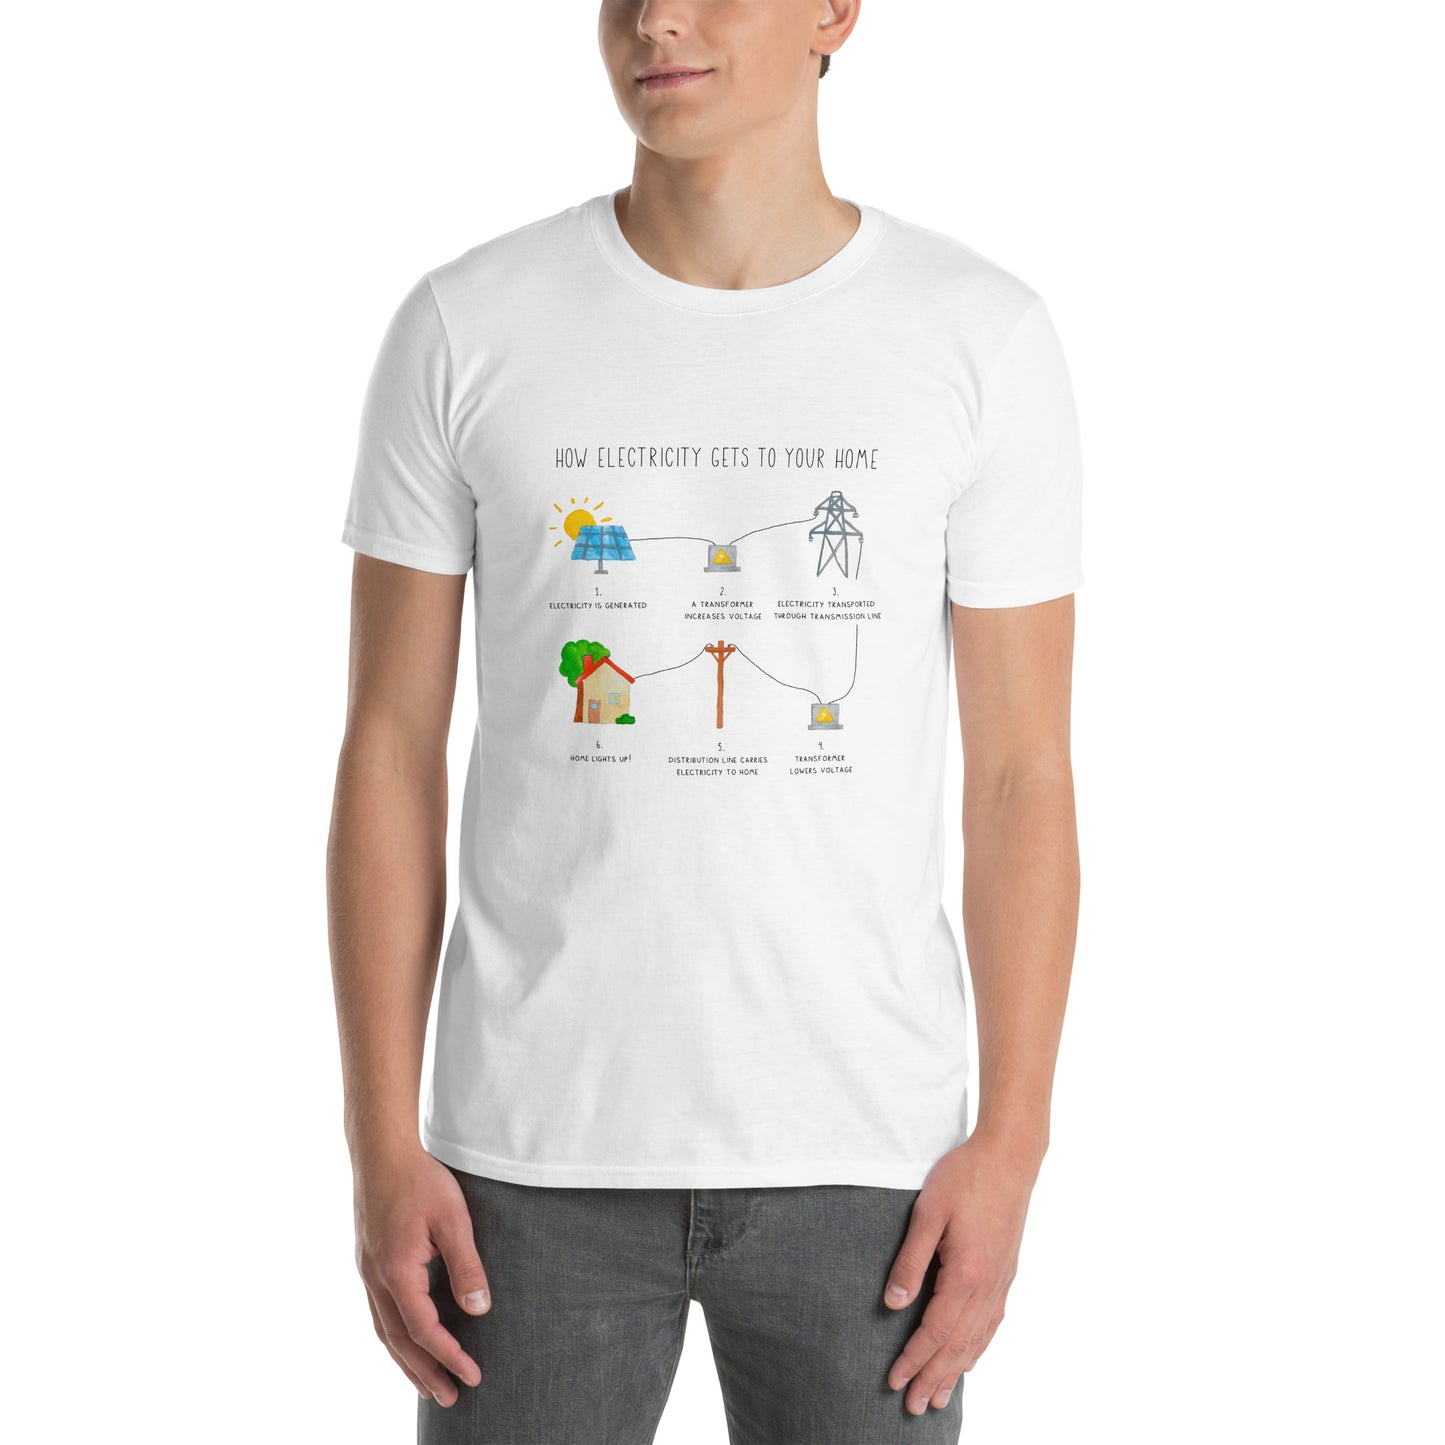 How Electricity Gets To Your Home Short-Sleeve Unisex T-Shirt